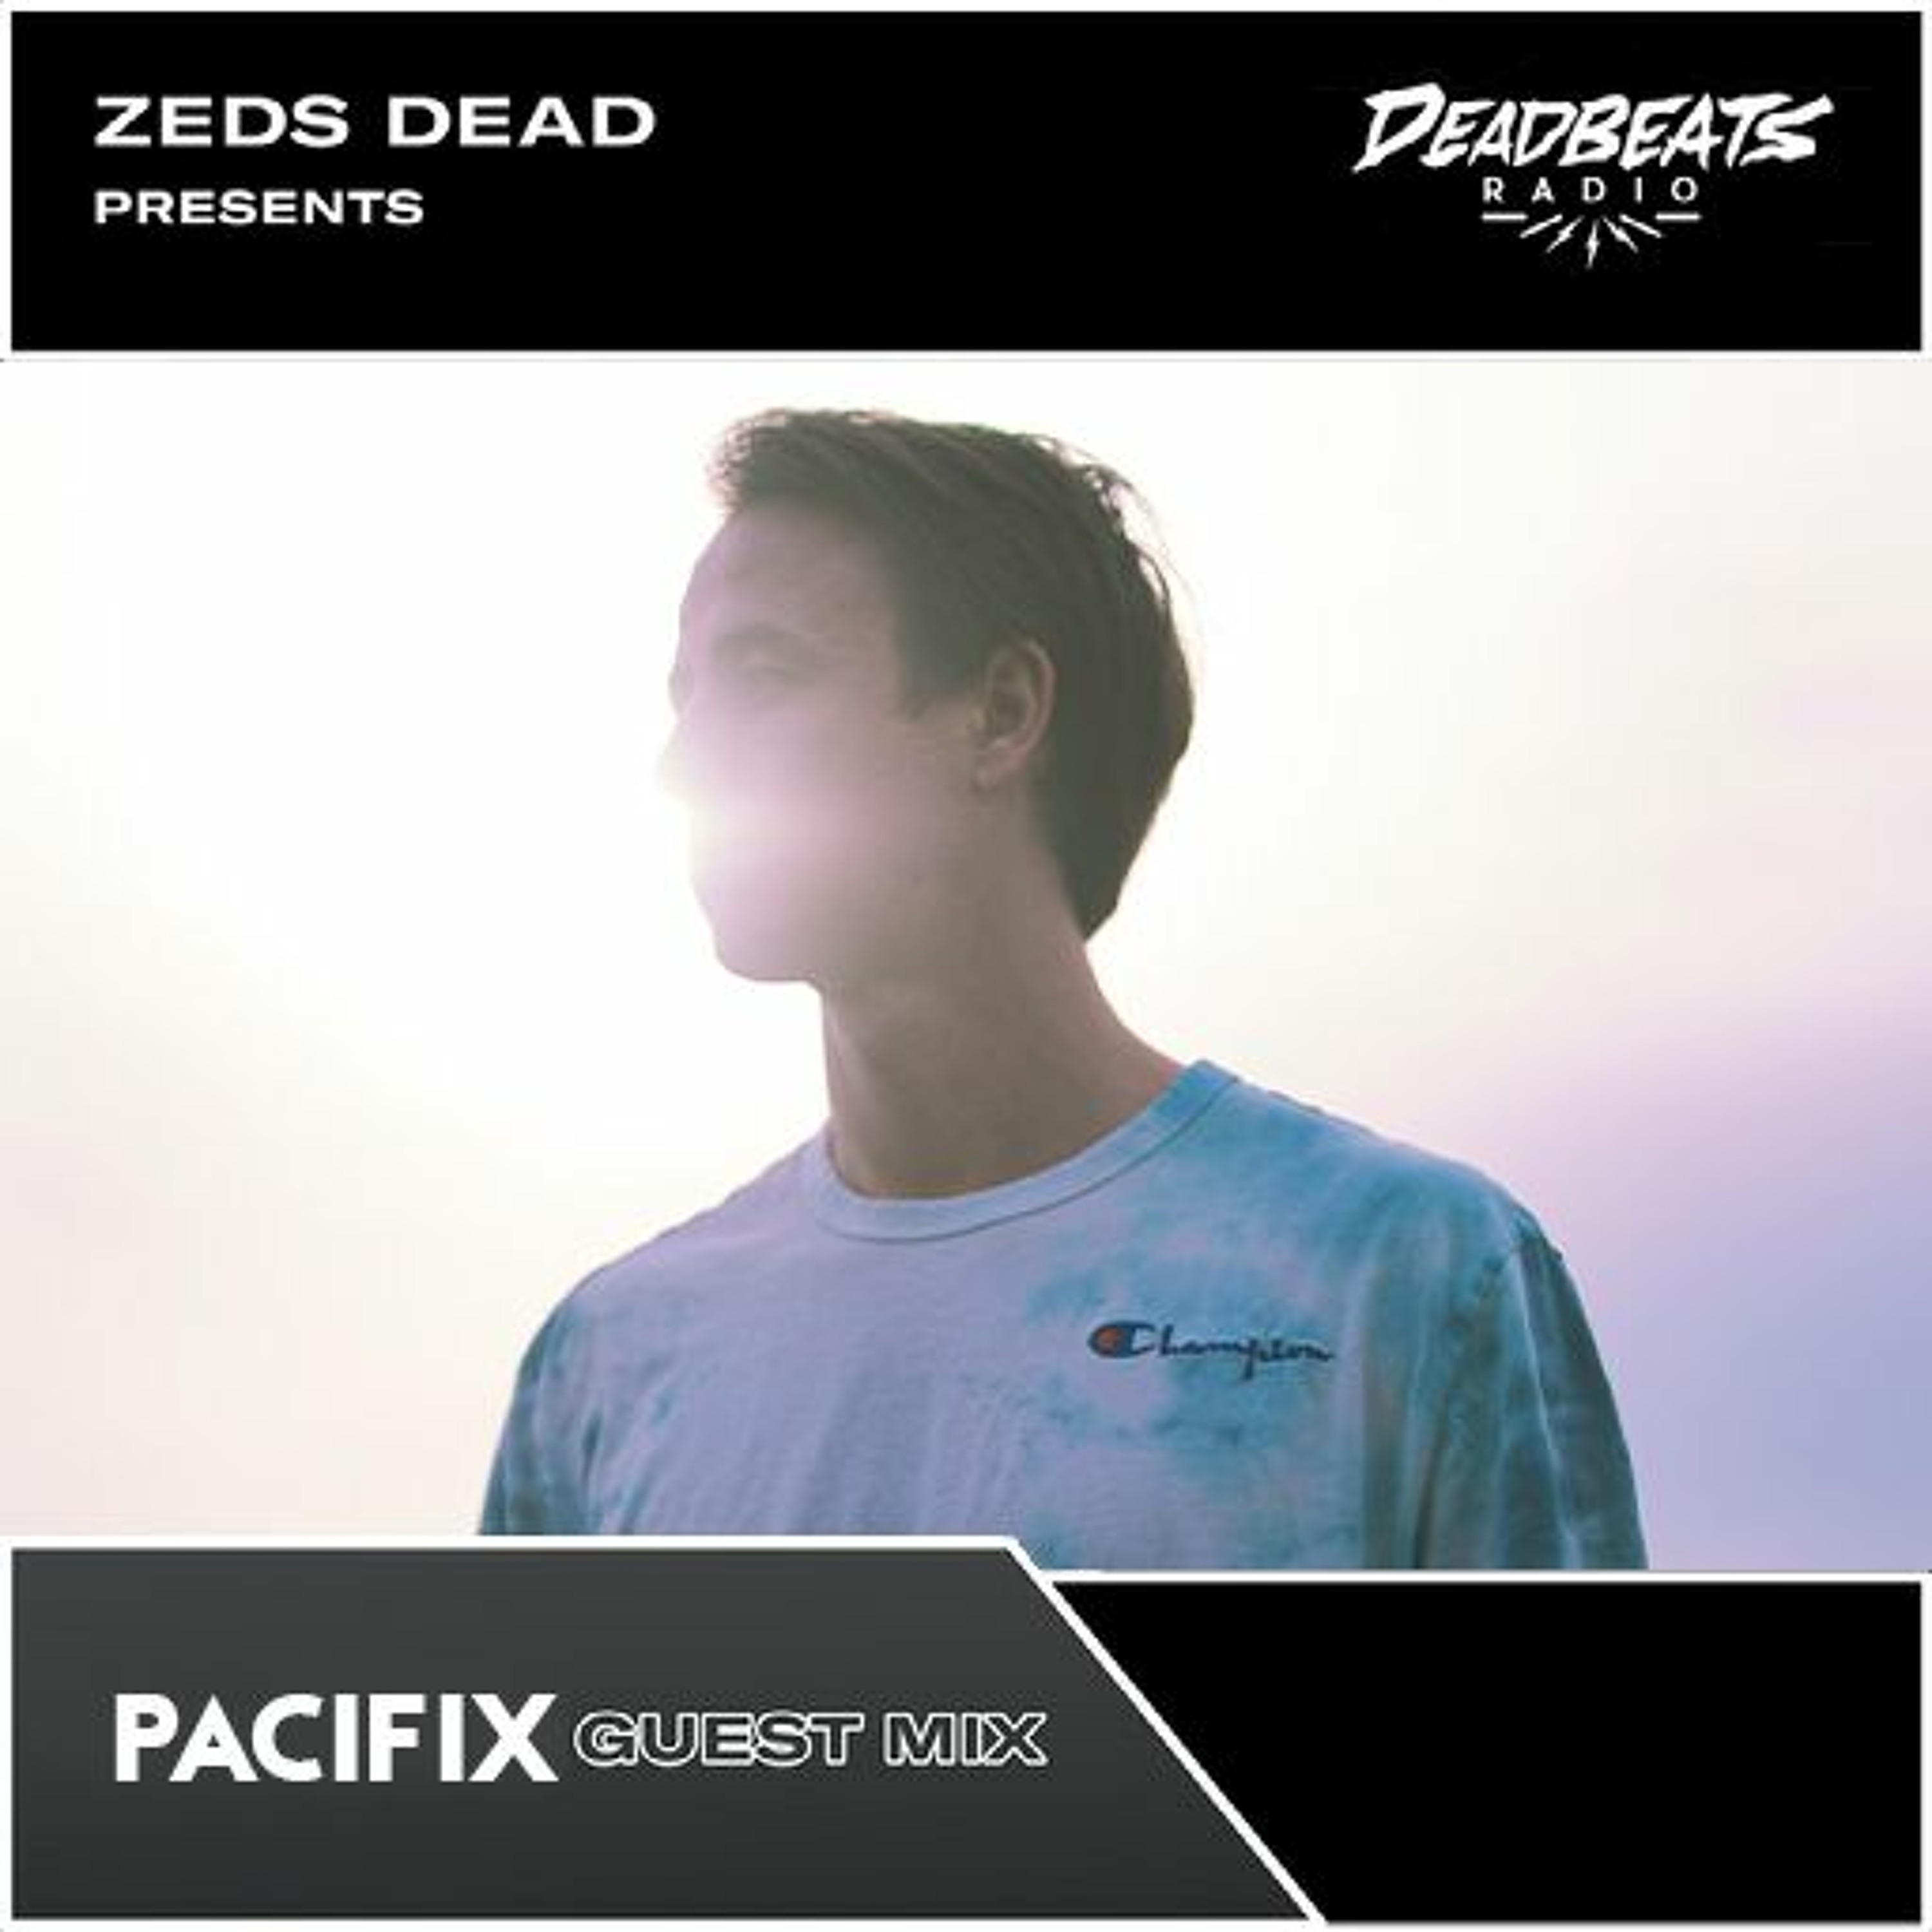 #229 Deadbeats Radio with Zeds Dead | Pacifix Guestmix [Altered States]